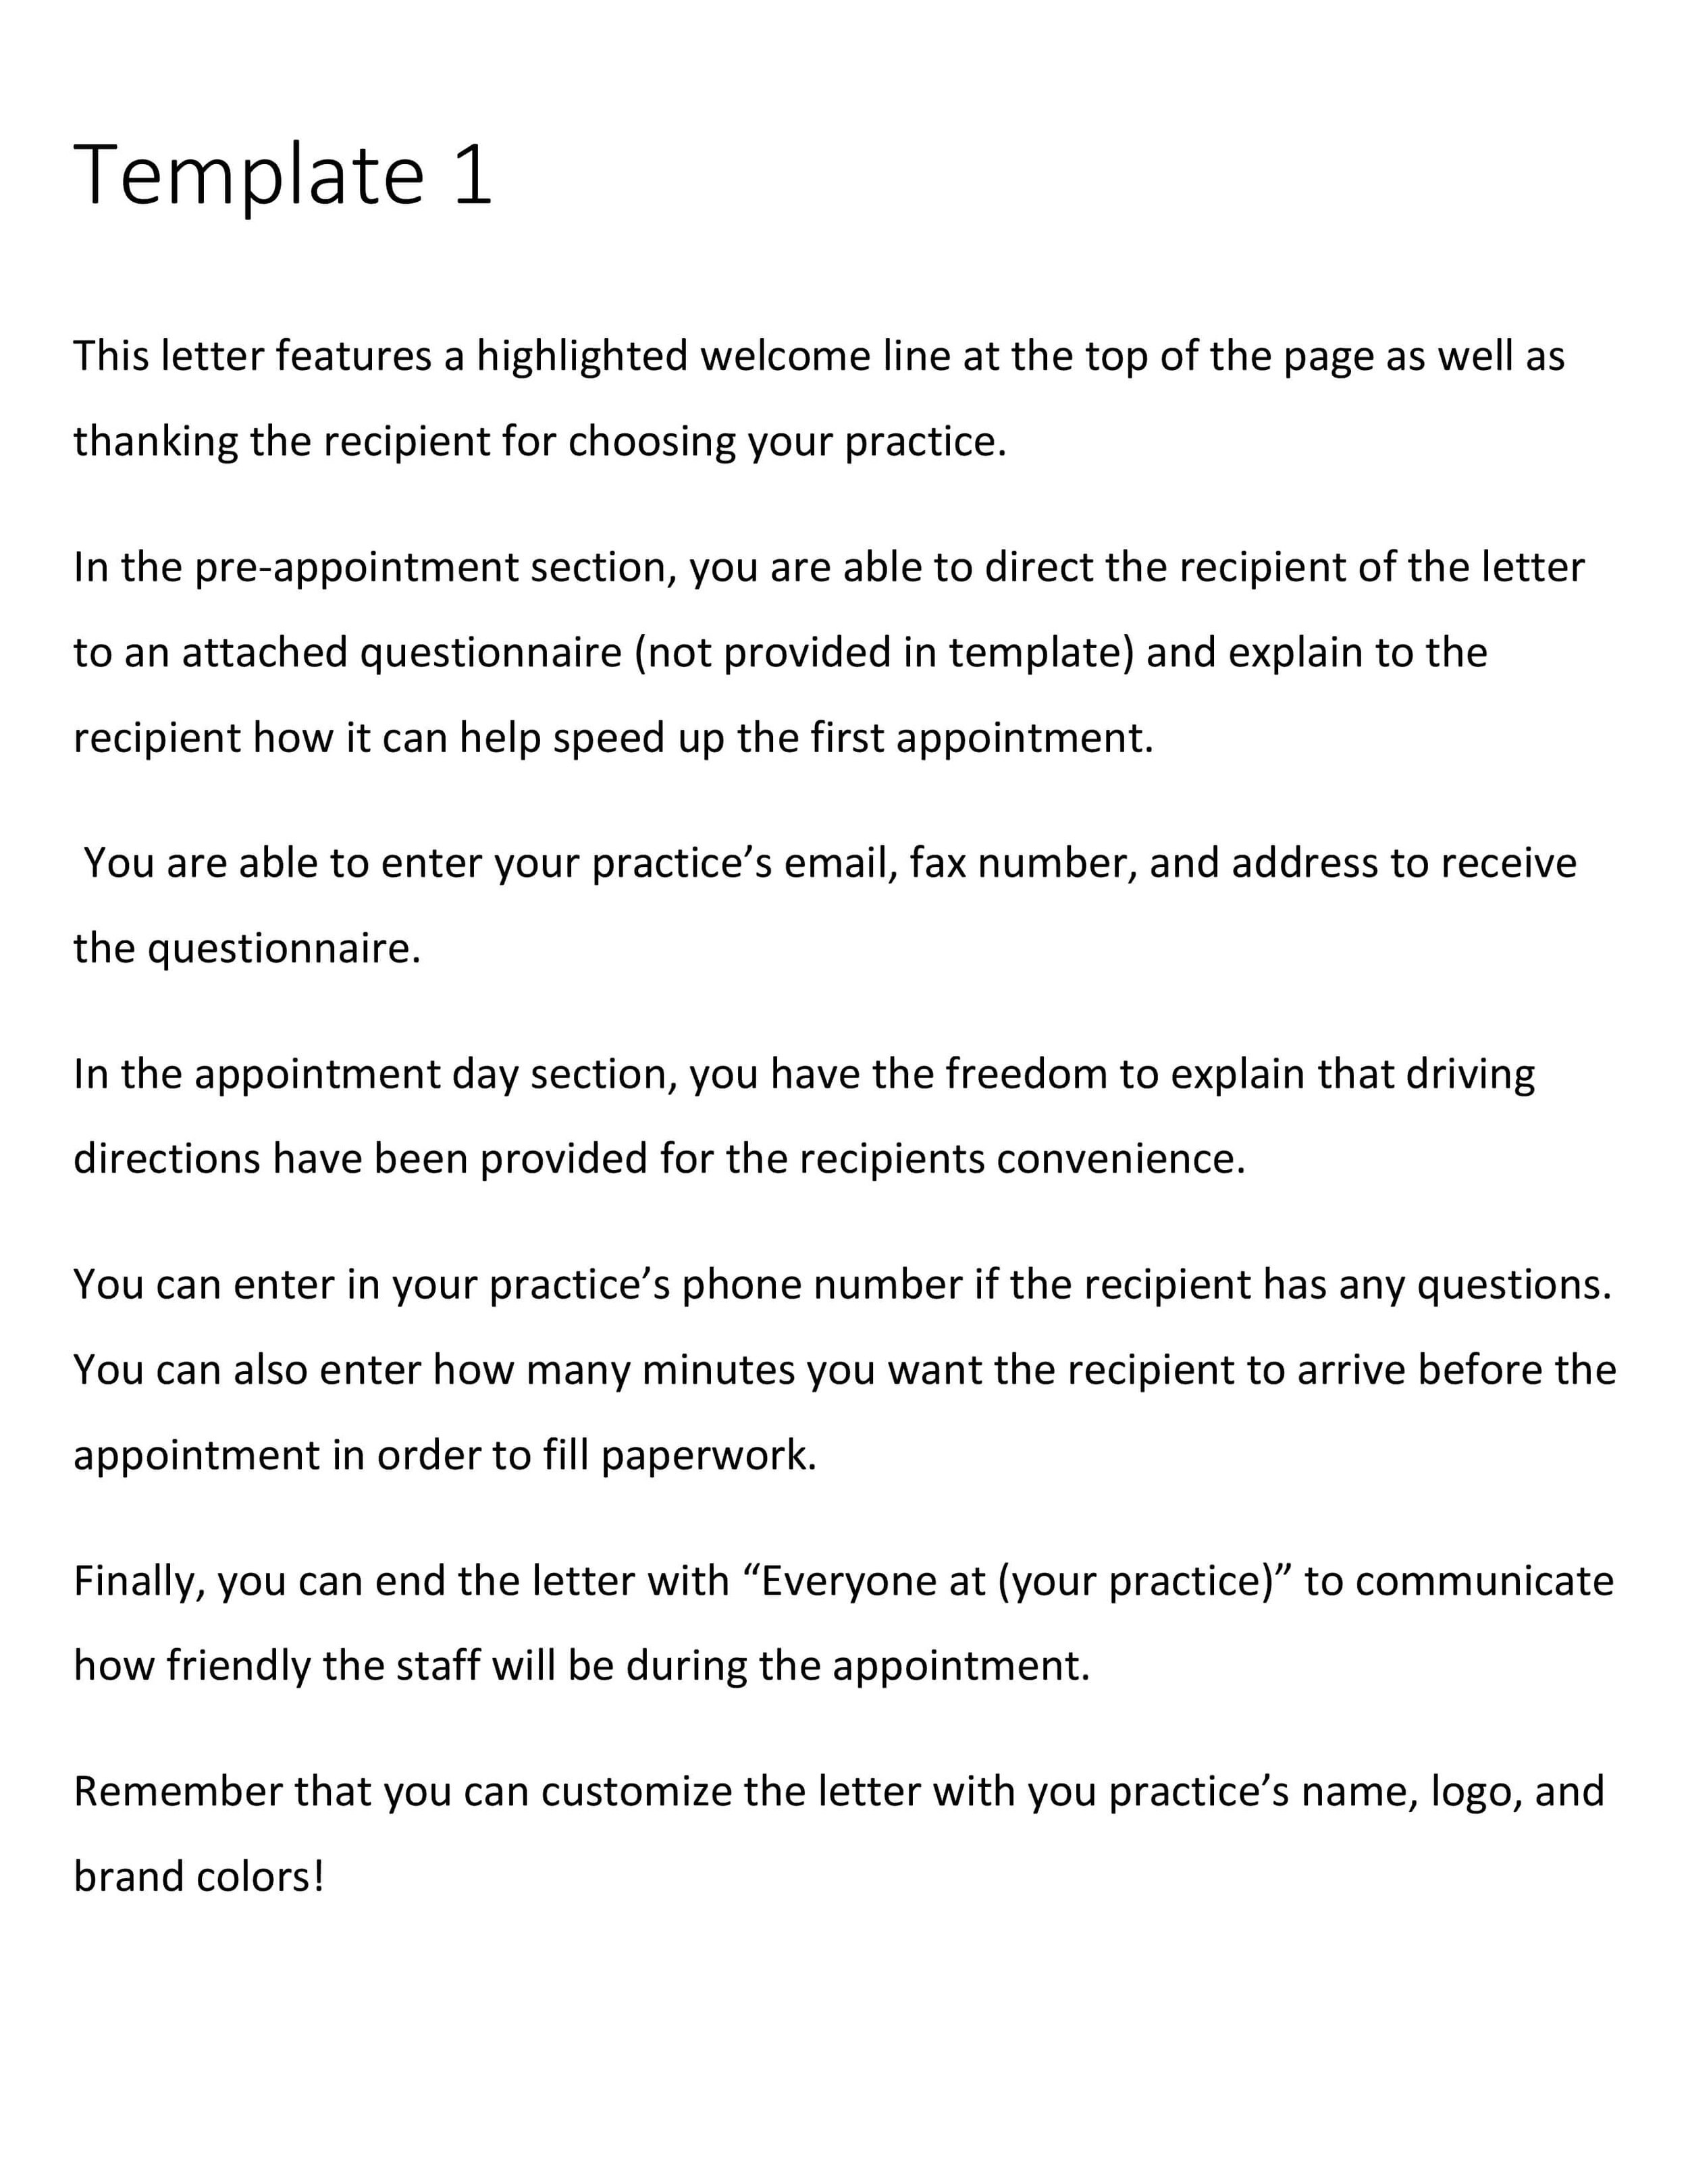 5 New Patient Welcome Letter Templates for Primary Care Physicians-3.jpg